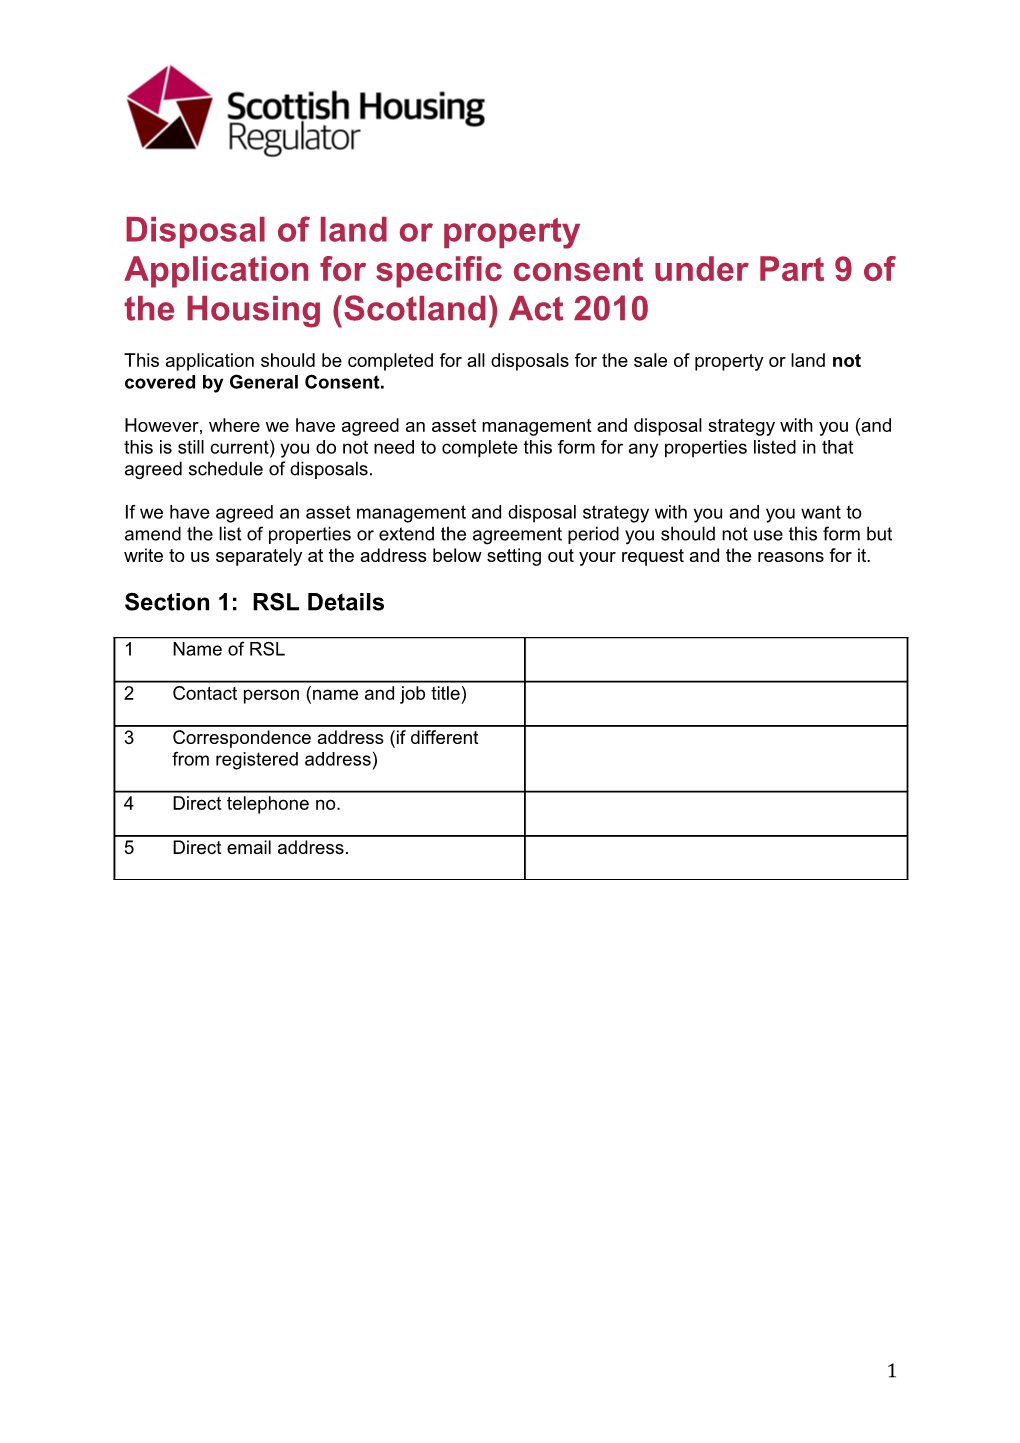 Application for Specific Consent Under Part 9 of the Housing (Scotland) Act 2010